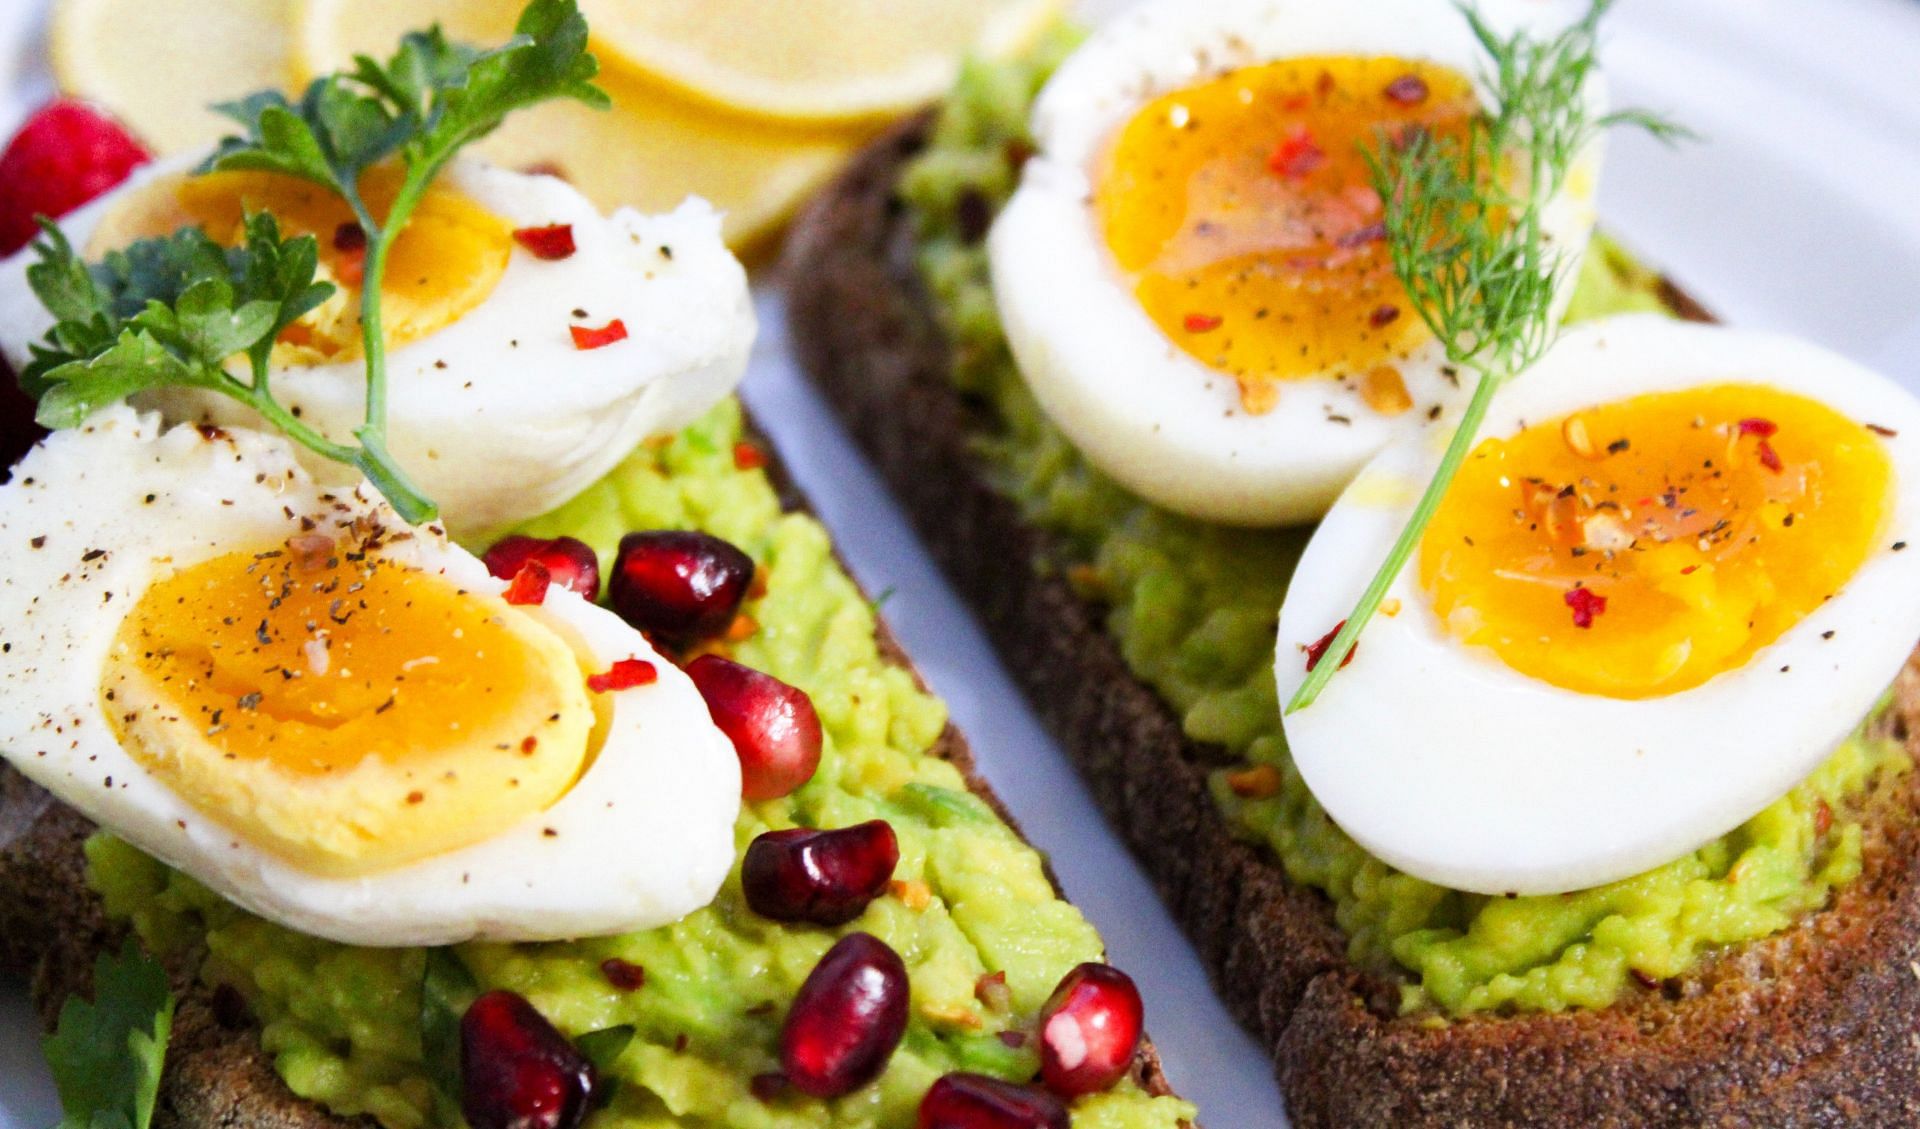 Cooked whole eggs are a rich source of biotin. (Image via Pexels/Jane Doan)